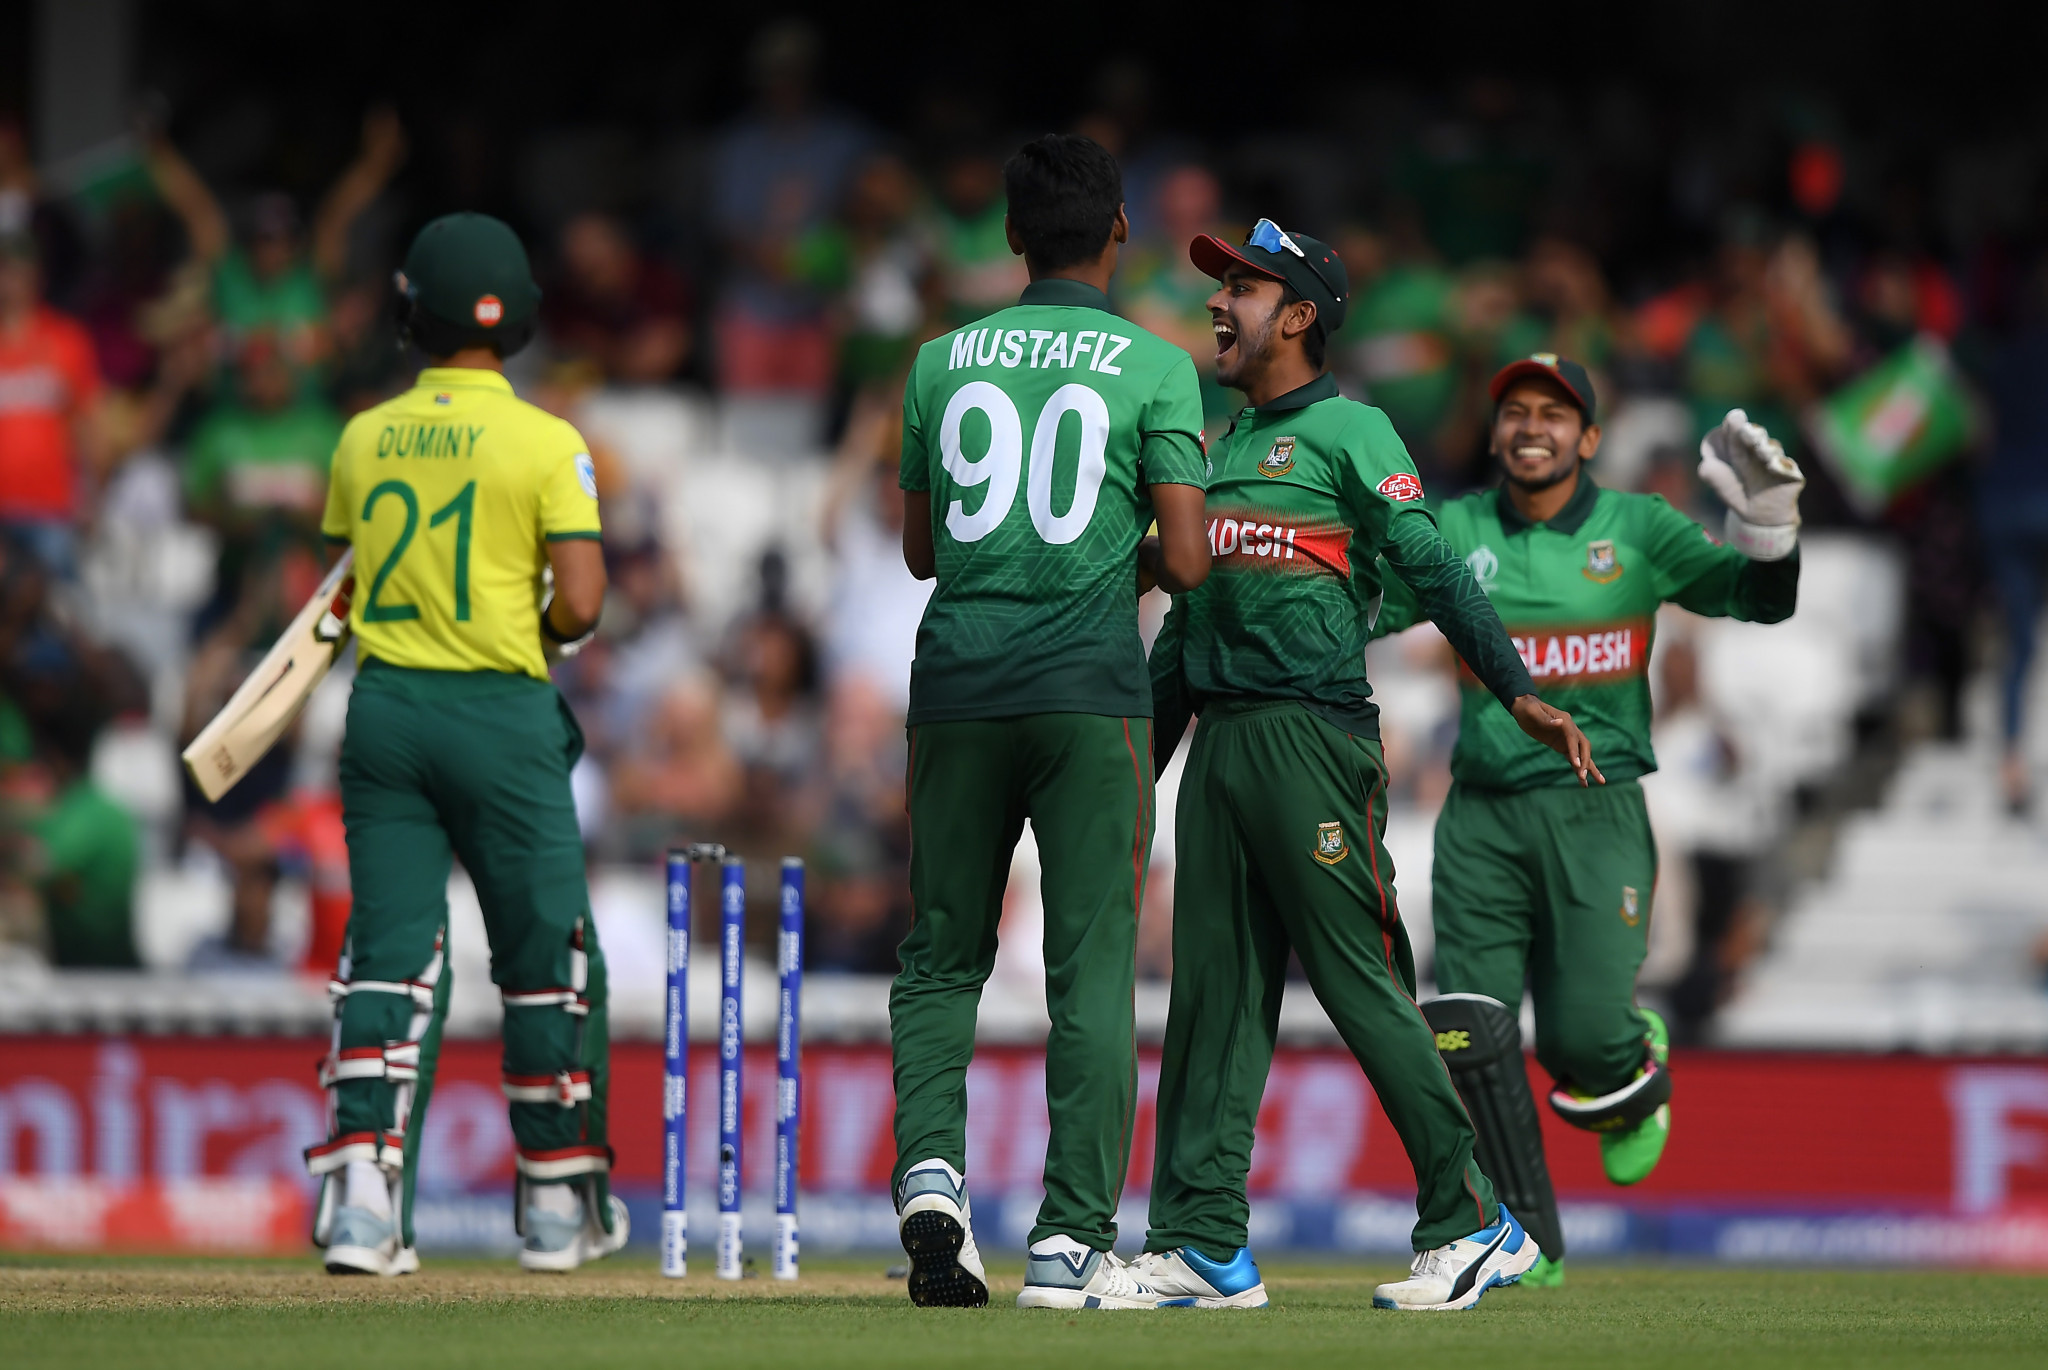 Bangladesh earn shock victory over South Africa at Cricket World Cup